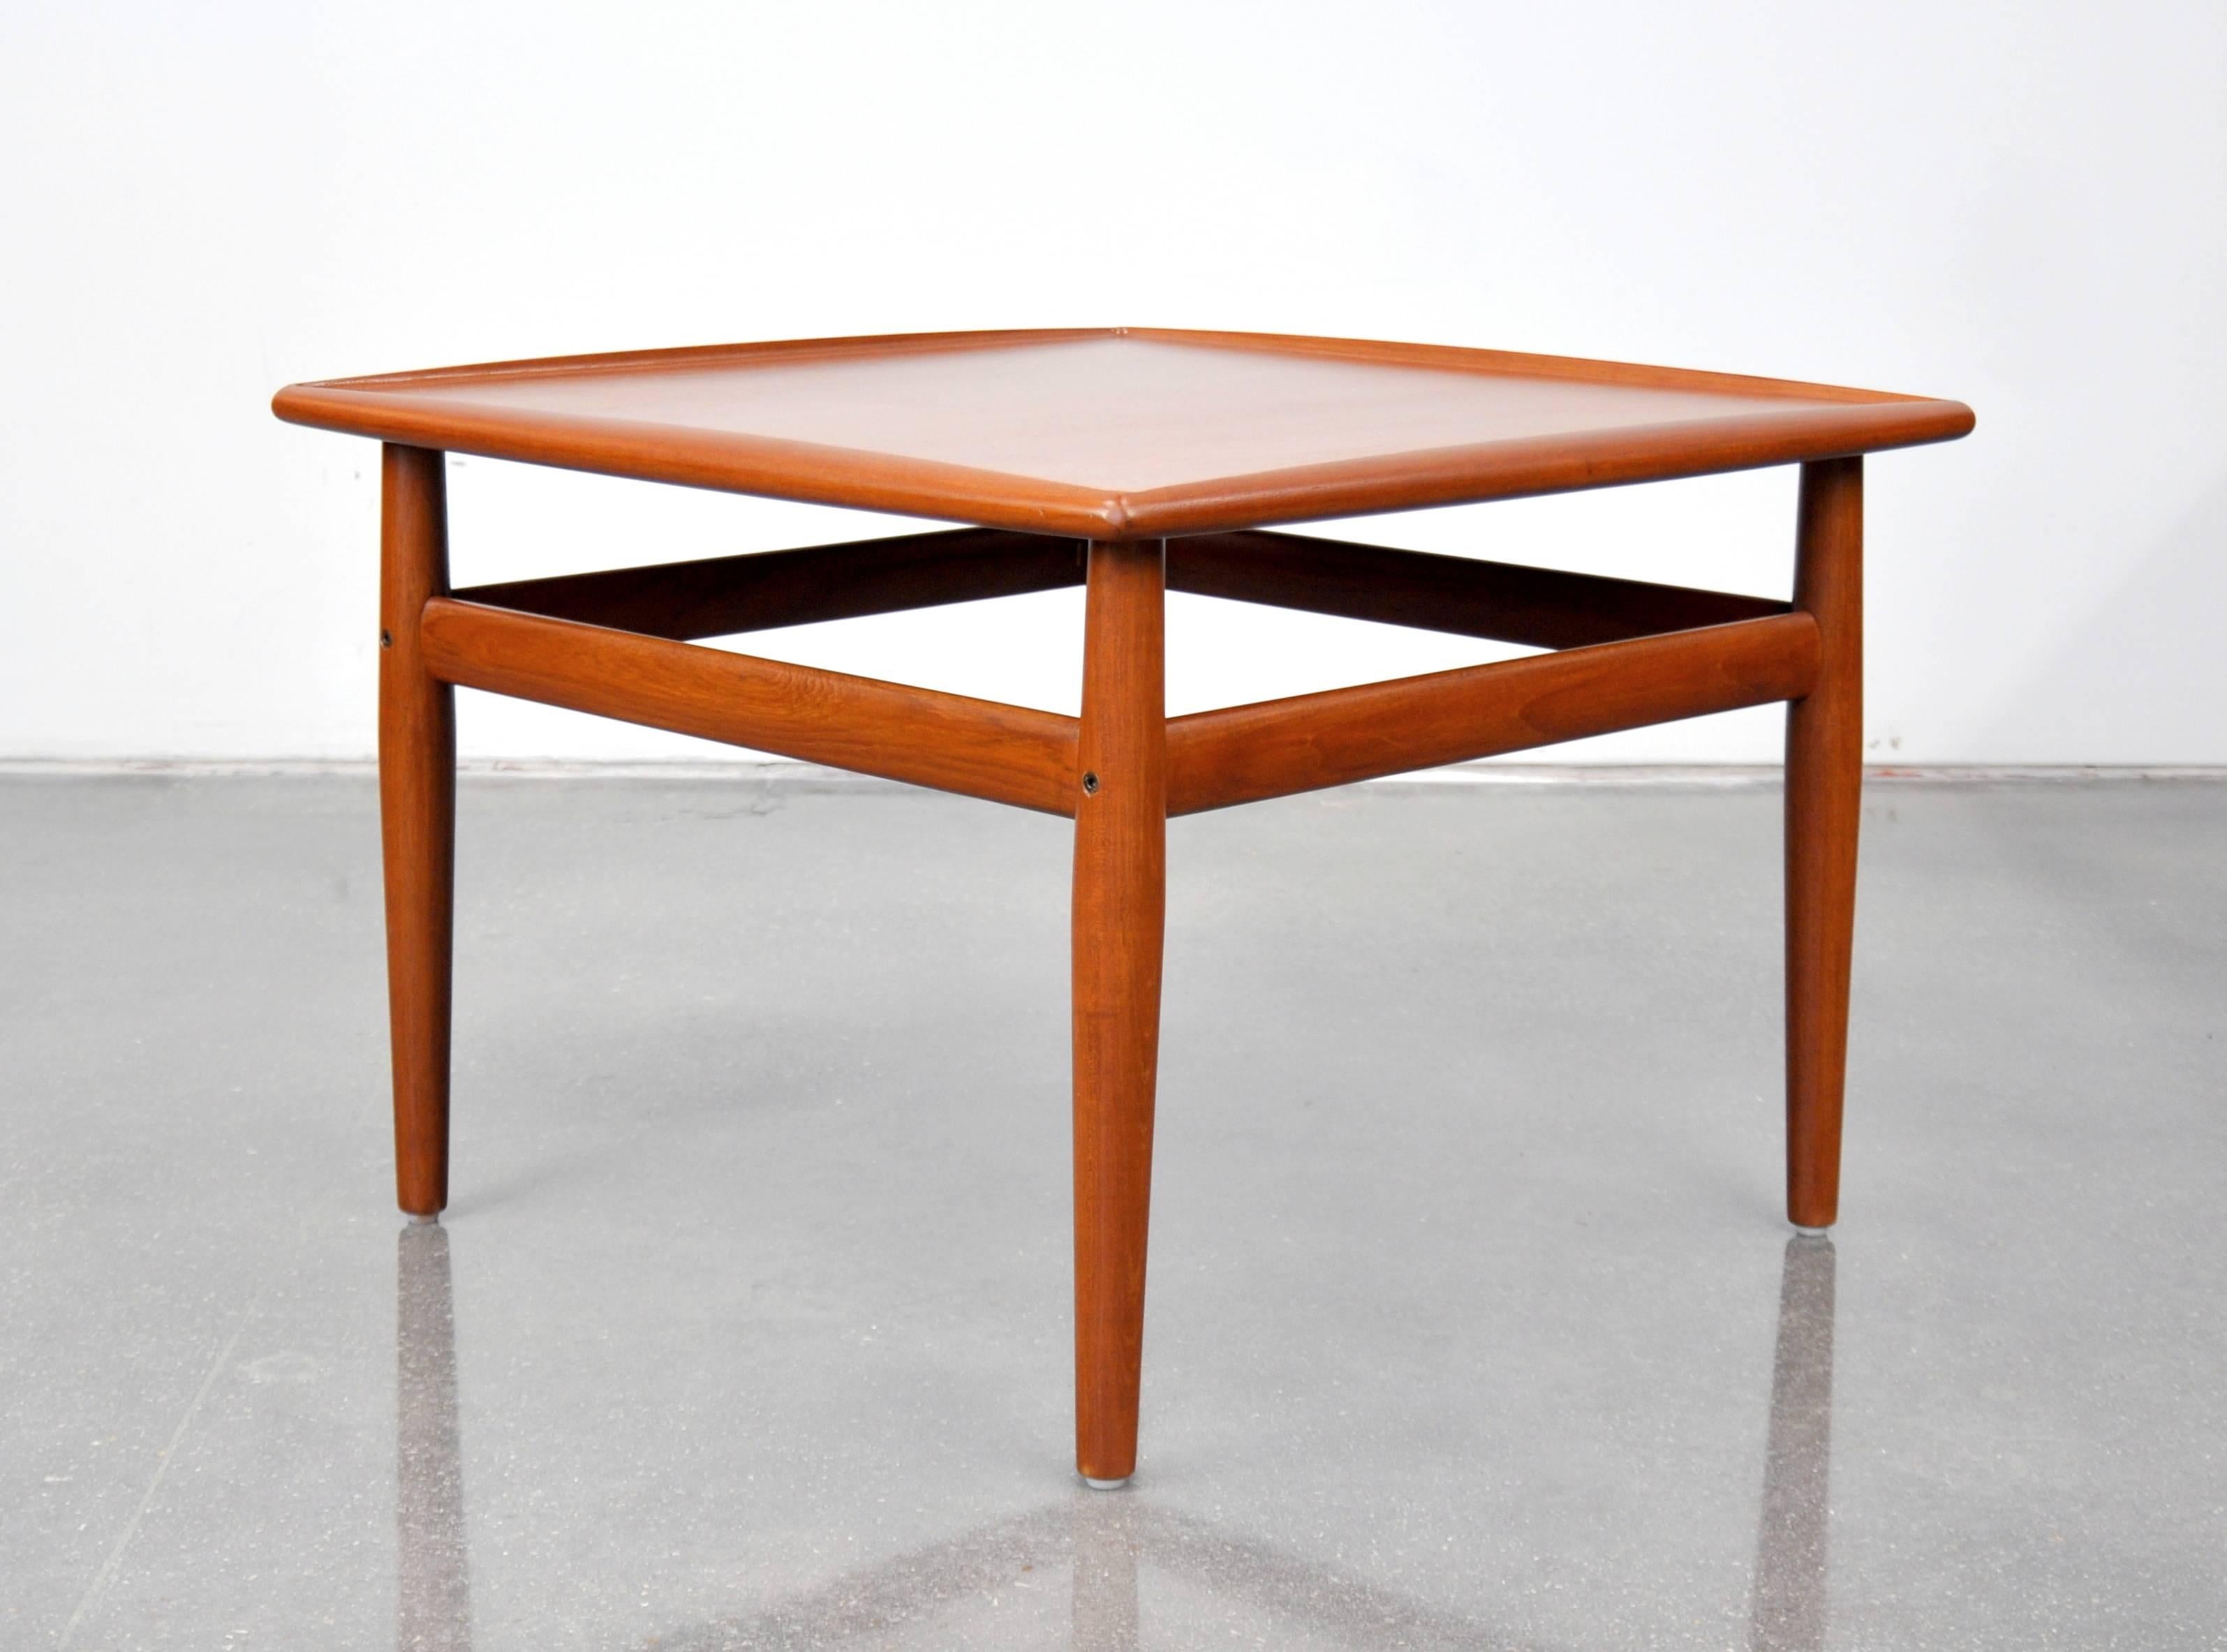 A pretty Danish Modern square occasional table that can be used as a coffee table. Designed by Grete Jalk for Glostrup, it dates from the 1960s. This Mid-Century Modern end or cocktail table features sculpted raised edges and inset brass details. A